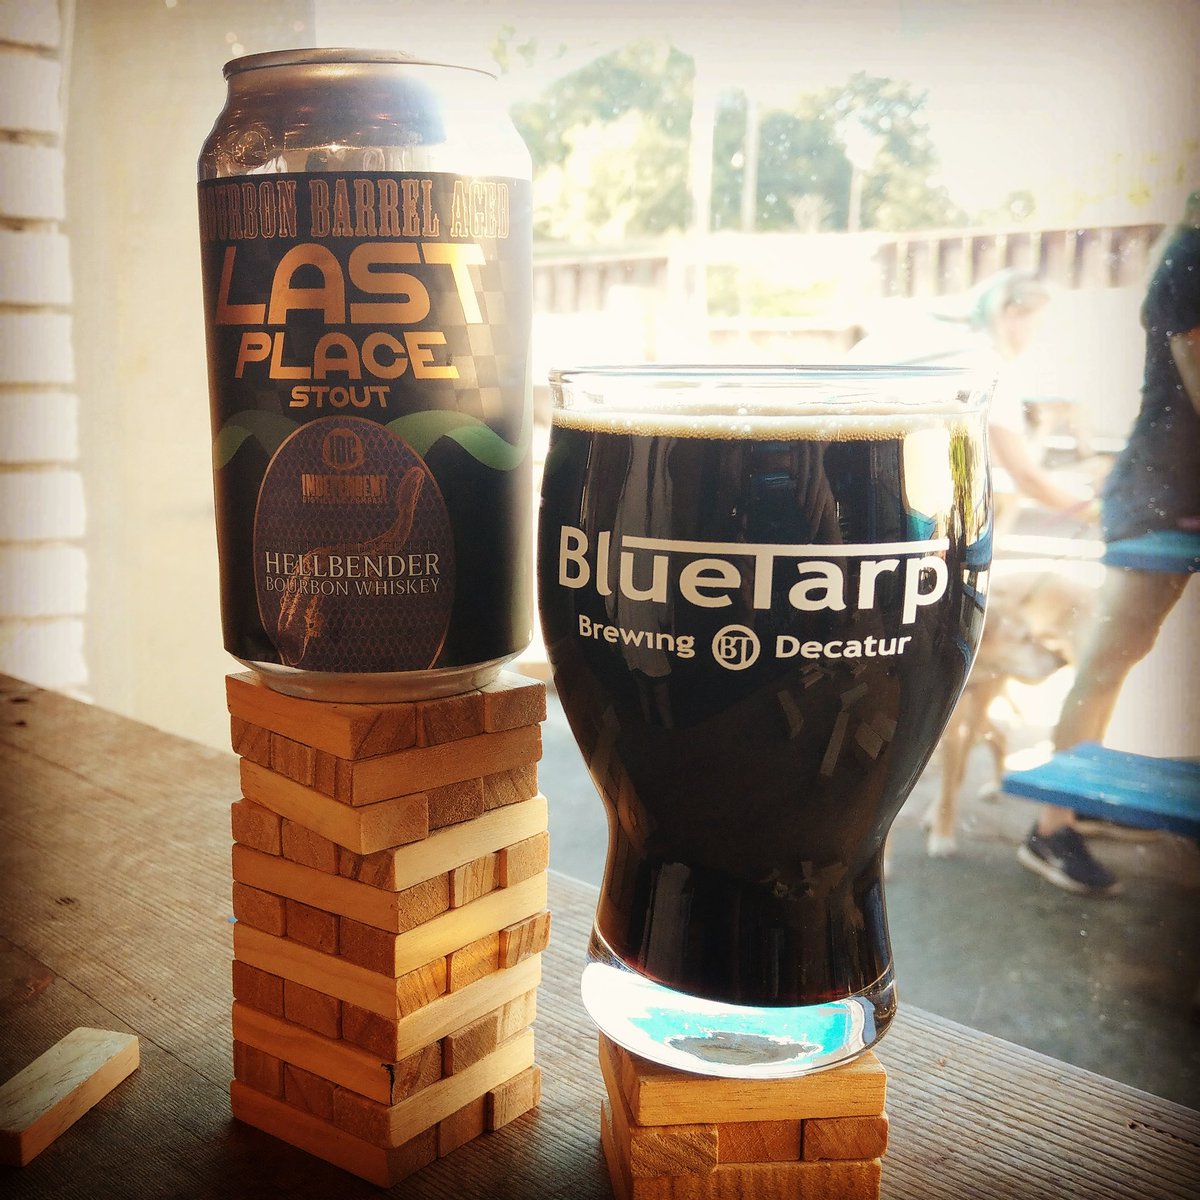 Bourbon Barrel Last Place Stout is back. One keg on draft today only as far as I know. 
.
.
#bourbonbarrel #craftbeer #fall #autumn #imperialstout #jenga  #gabeer #specialbeer